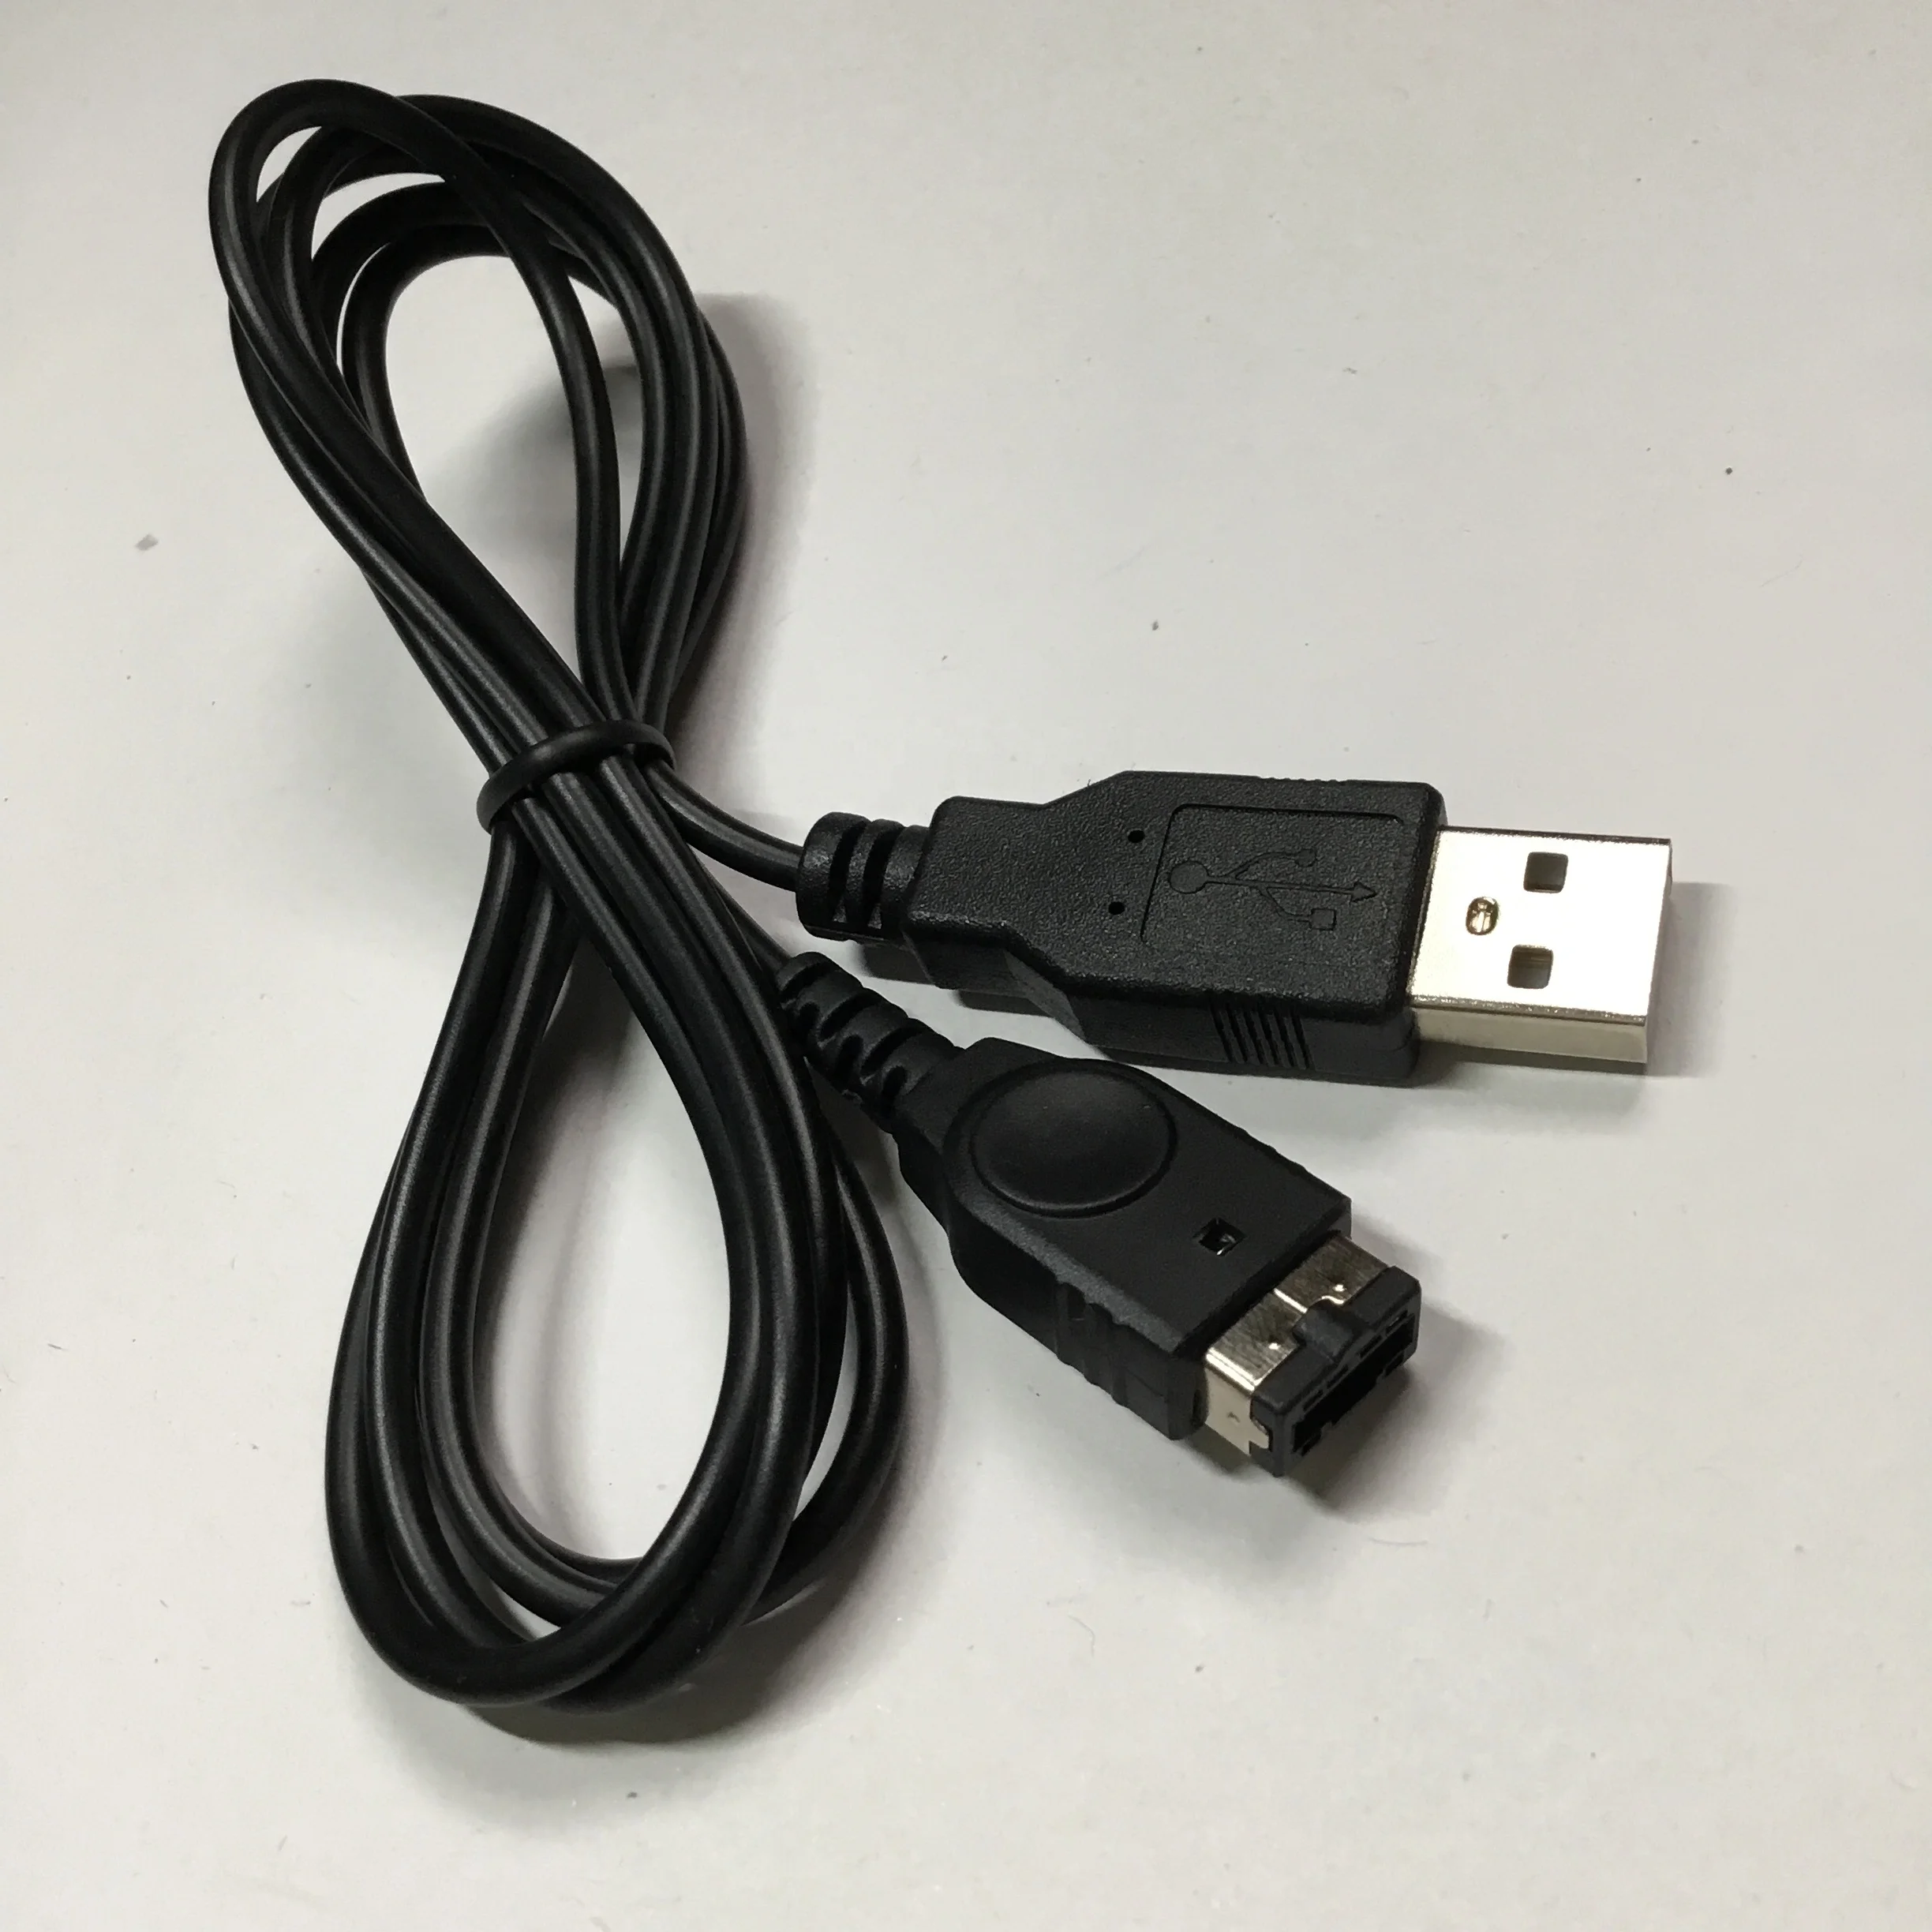 1 2m For Gba Sp Usb Charger Cable For Nintendo Ds For Nds Usb Cable For Gameboy Advance Sp Charging Lead Cable Buy At The Price Of 0 In Alibaba Com Imall Com